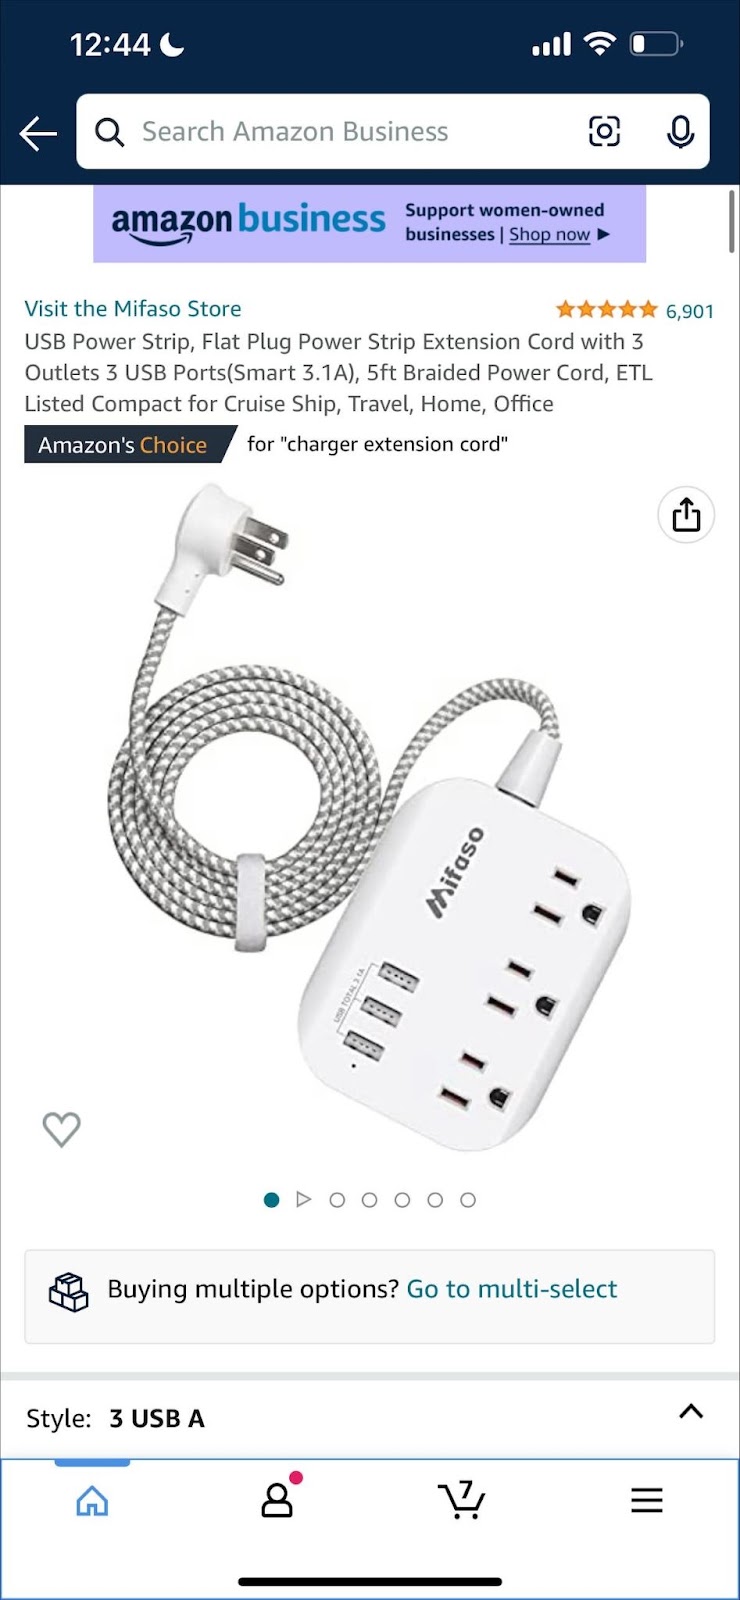 12:44 Search Amazon Business business Support women-owned amazon businesses I Shop now Visit the Mifaso Store USB Power Strip, Flat Plug Power Strip Extension Cord with 3 Outlets 3 USB Ports(Smart 3.1 A), 5ft Braided Power Cord, E TL Listed Compact for Cruise Ship, Travel, Home, Office for "charger extension cord" Amazon's Choice 6,901 Style: Buying multiple options? Go to multi-select 3 USB A 